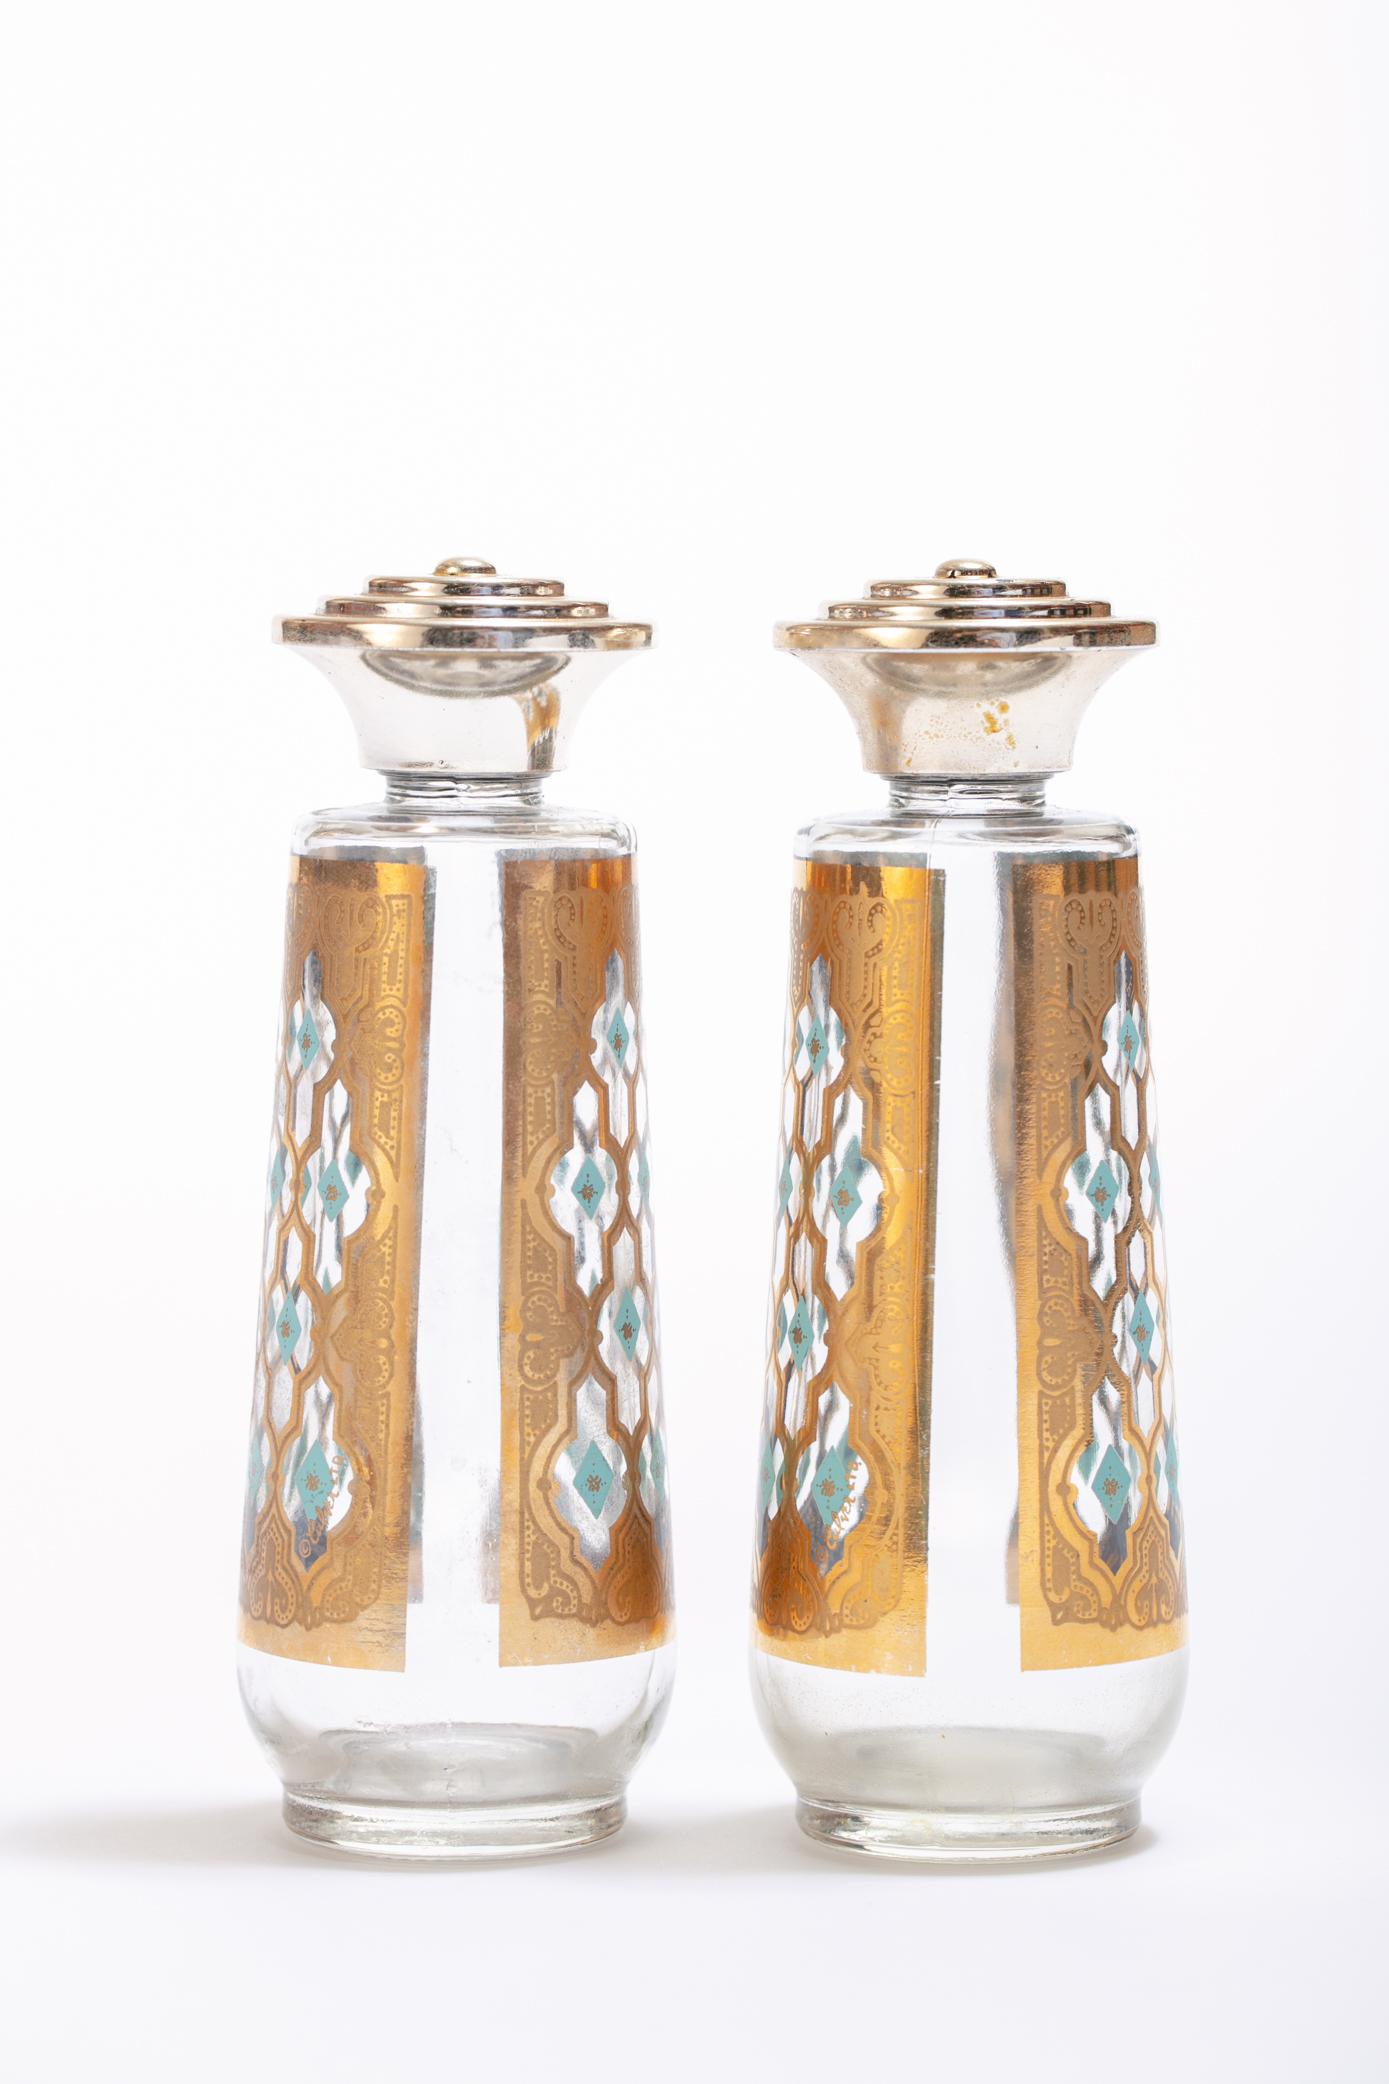 Culver LTD Mid-Century Modern, atomic style glass salt and pepper shakers featuring 22-karat gold Sevilla pattern on the glass. The lids are made of chrome-toned painted plastic and are in good vintage condition. Want to see more beautiful things?